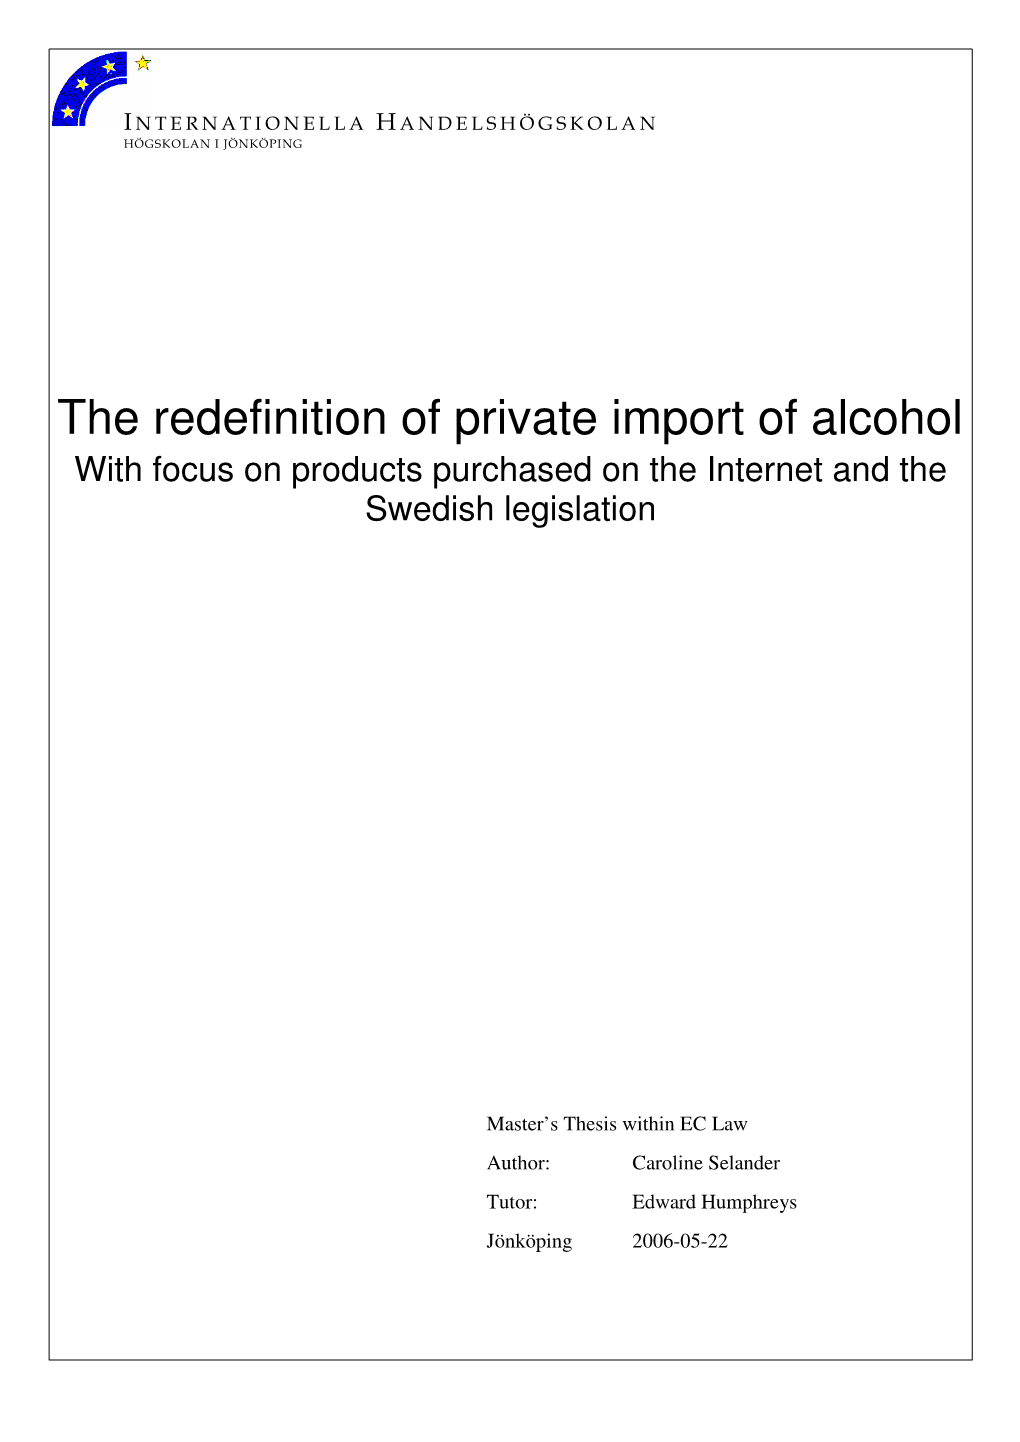 The Redefinition of Private Import of Alcohol with Focus on Products Purchased on the Internet and the Swedish Legislation